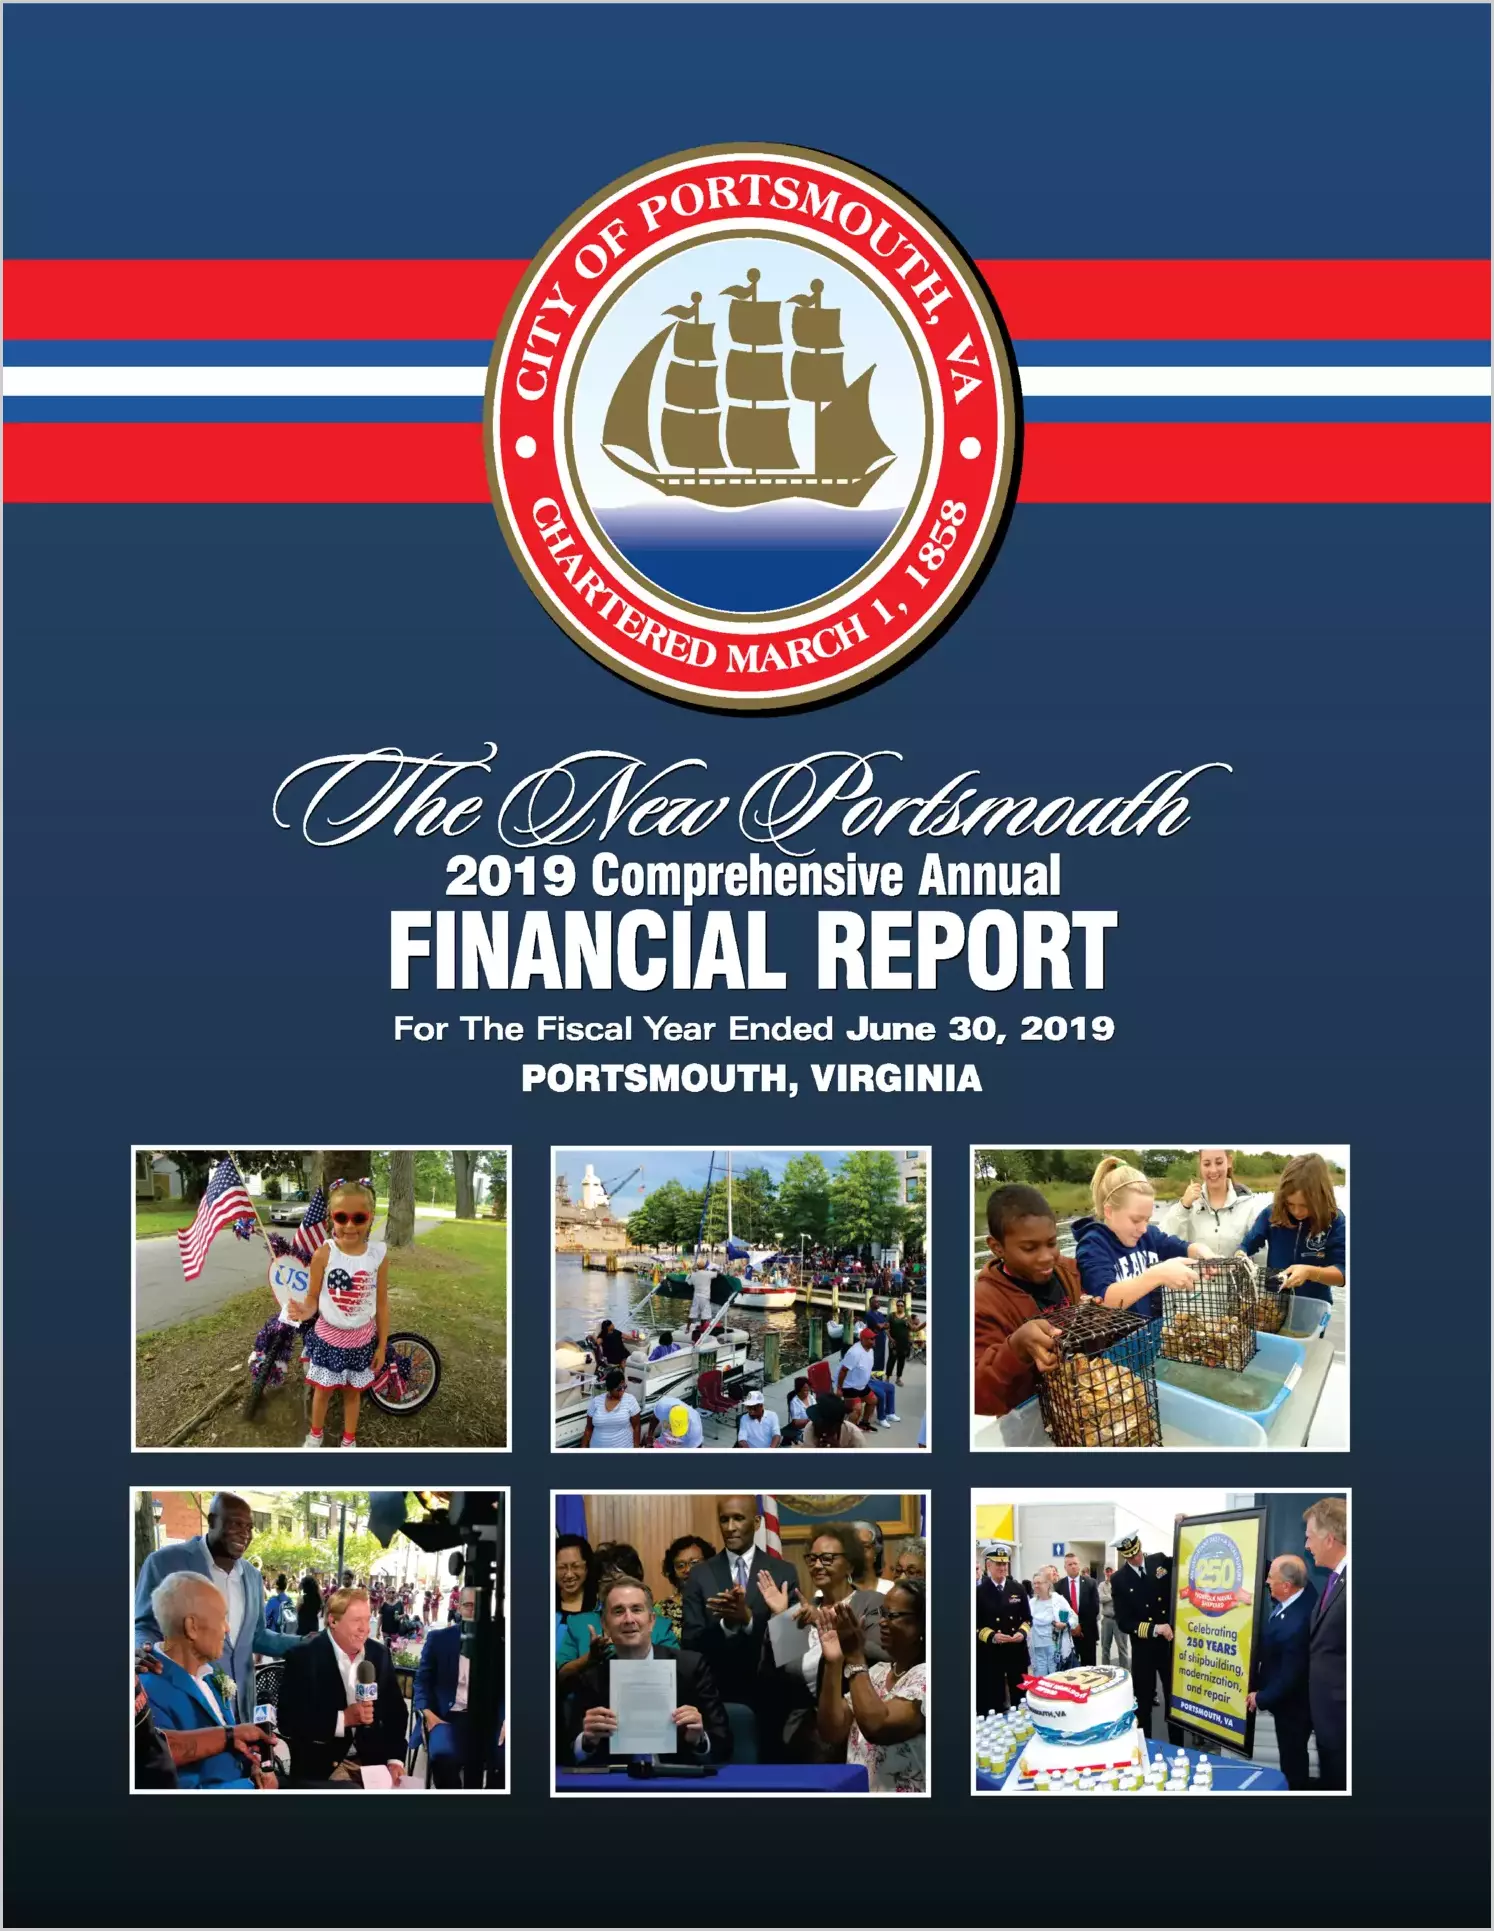 2019 Annual Financial Report for City of Portsmouth